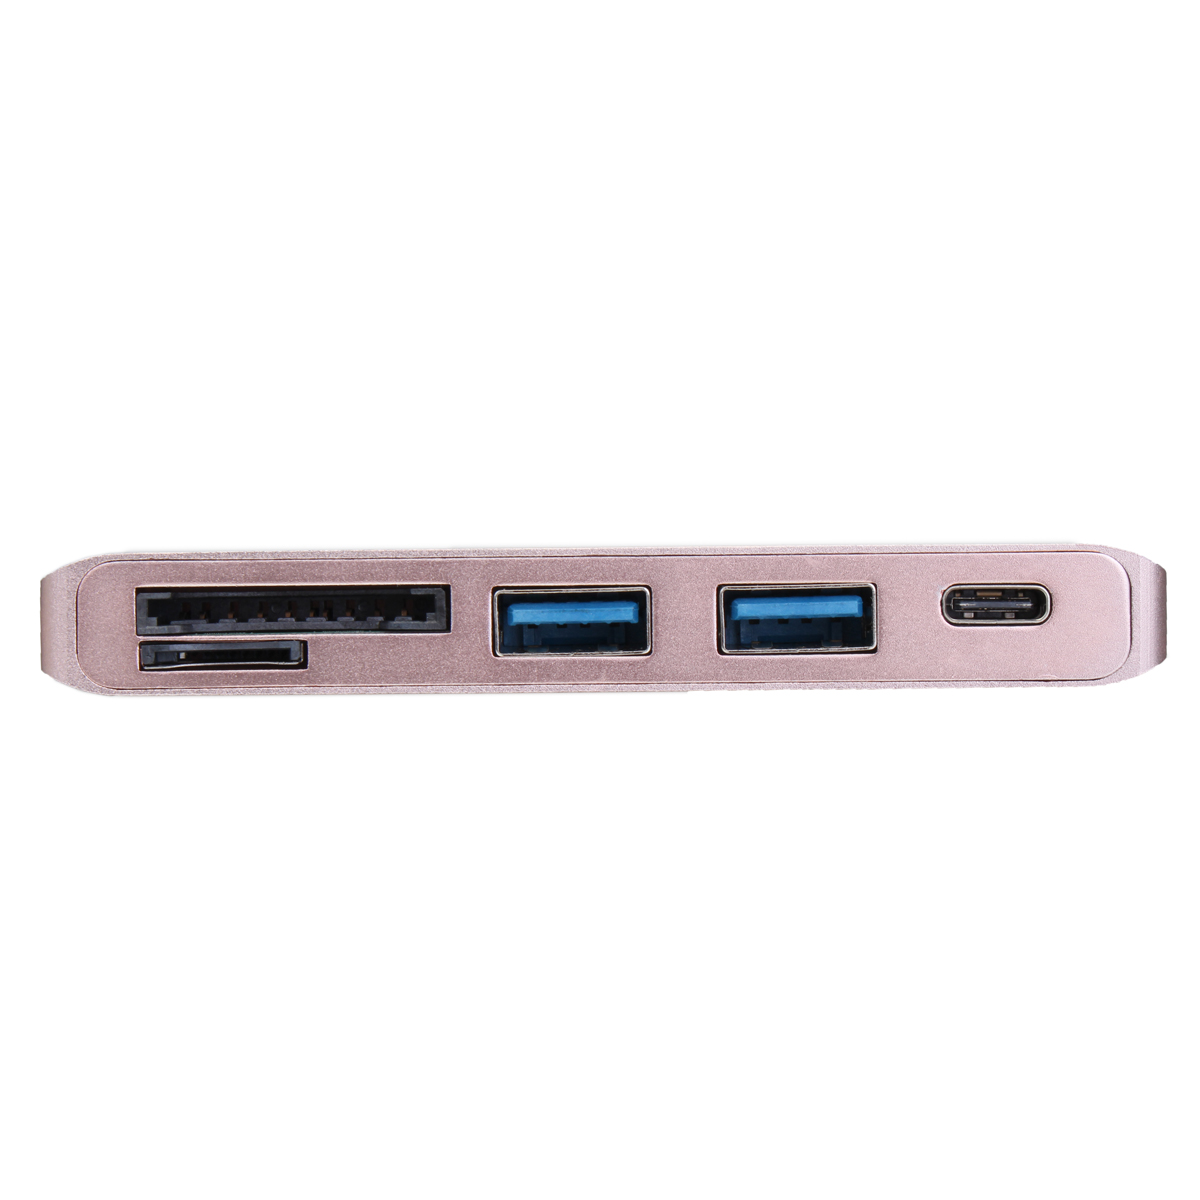 Multifunction USB Hub Type-C to Type-C USB 3.0 2Ports TF SD Card Reader for Laptop PC 69